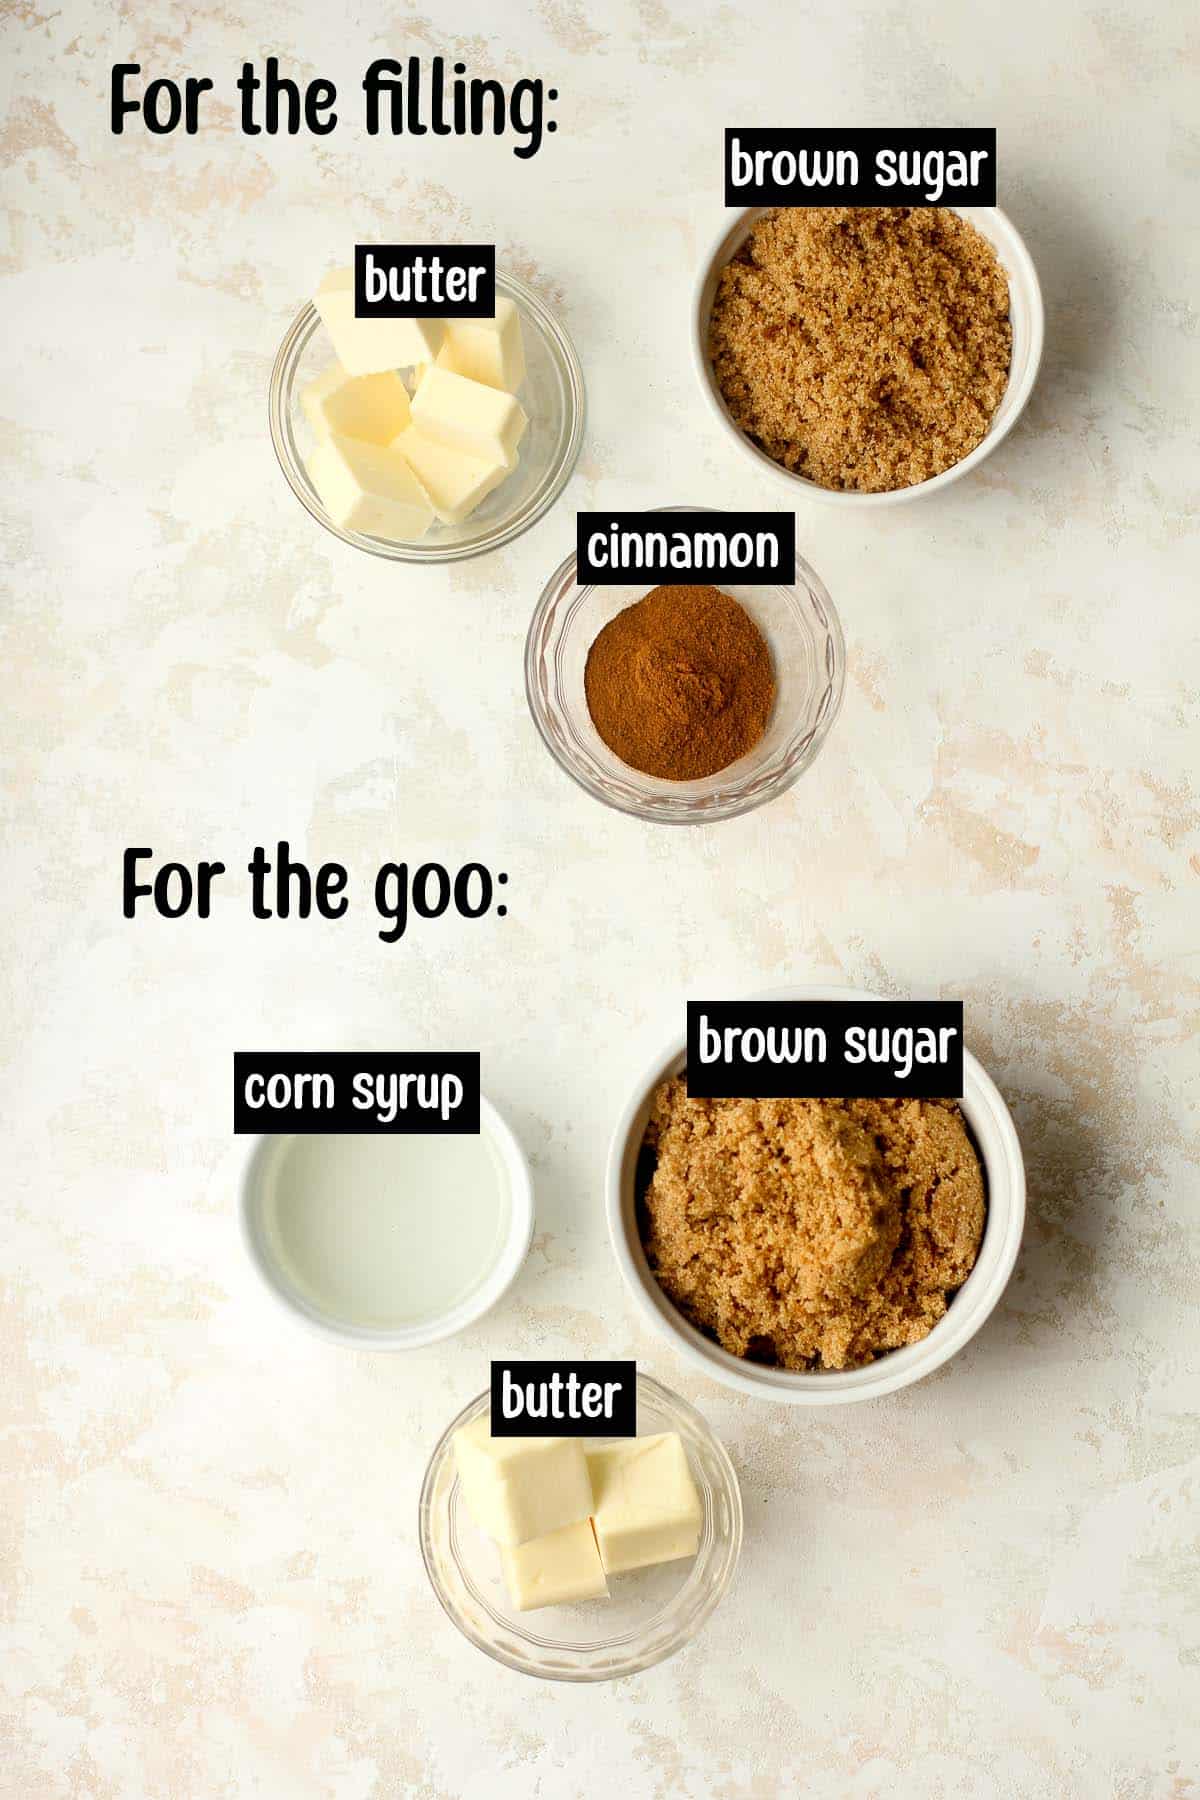 The labeled ingredients for the filling and the goo.